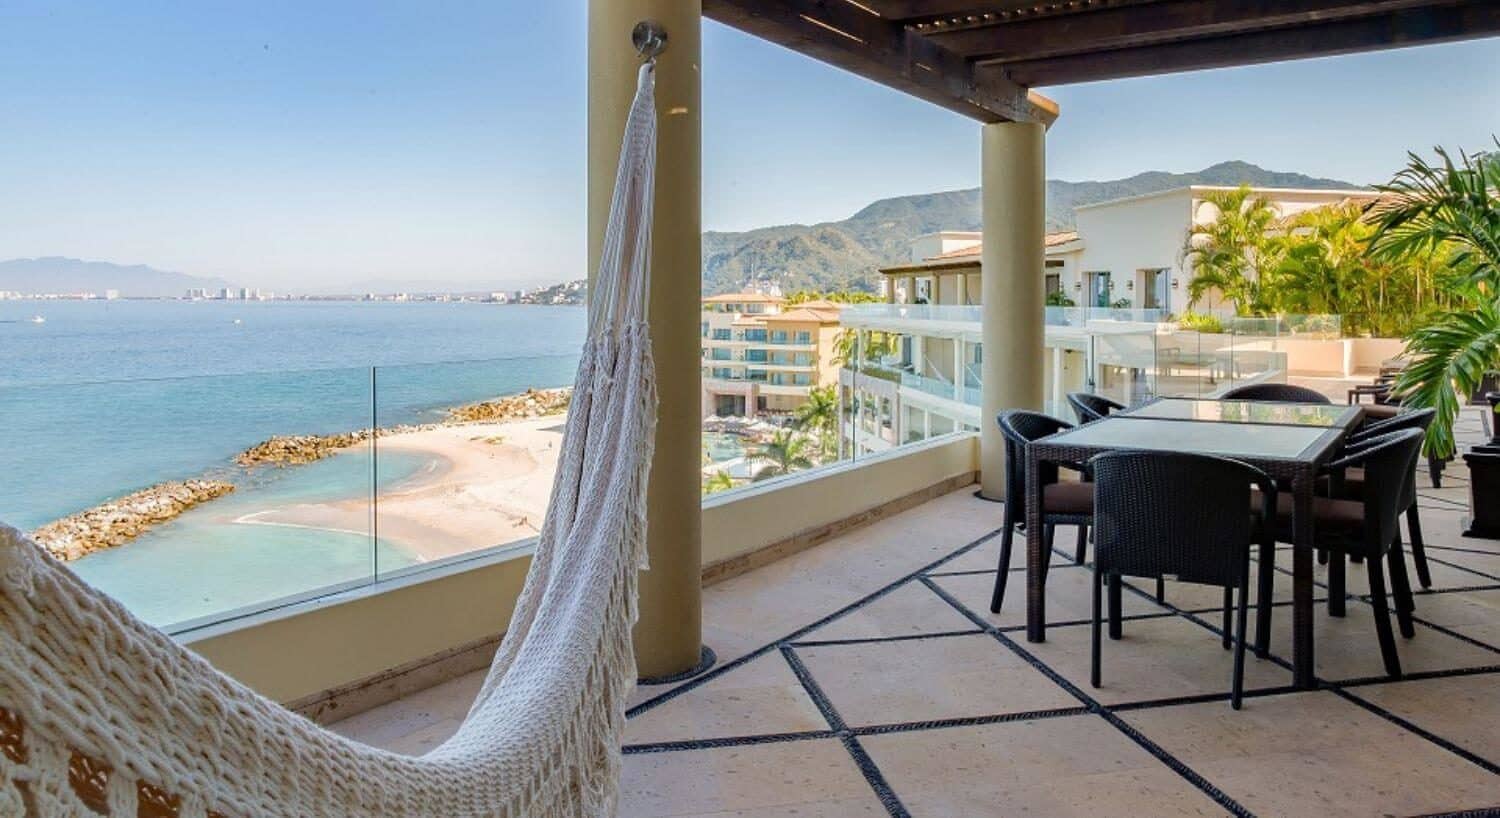 A private outdoor terrace with a dining table and chairs, and a hammock facing the ocean and mountains of Banderas Bay.